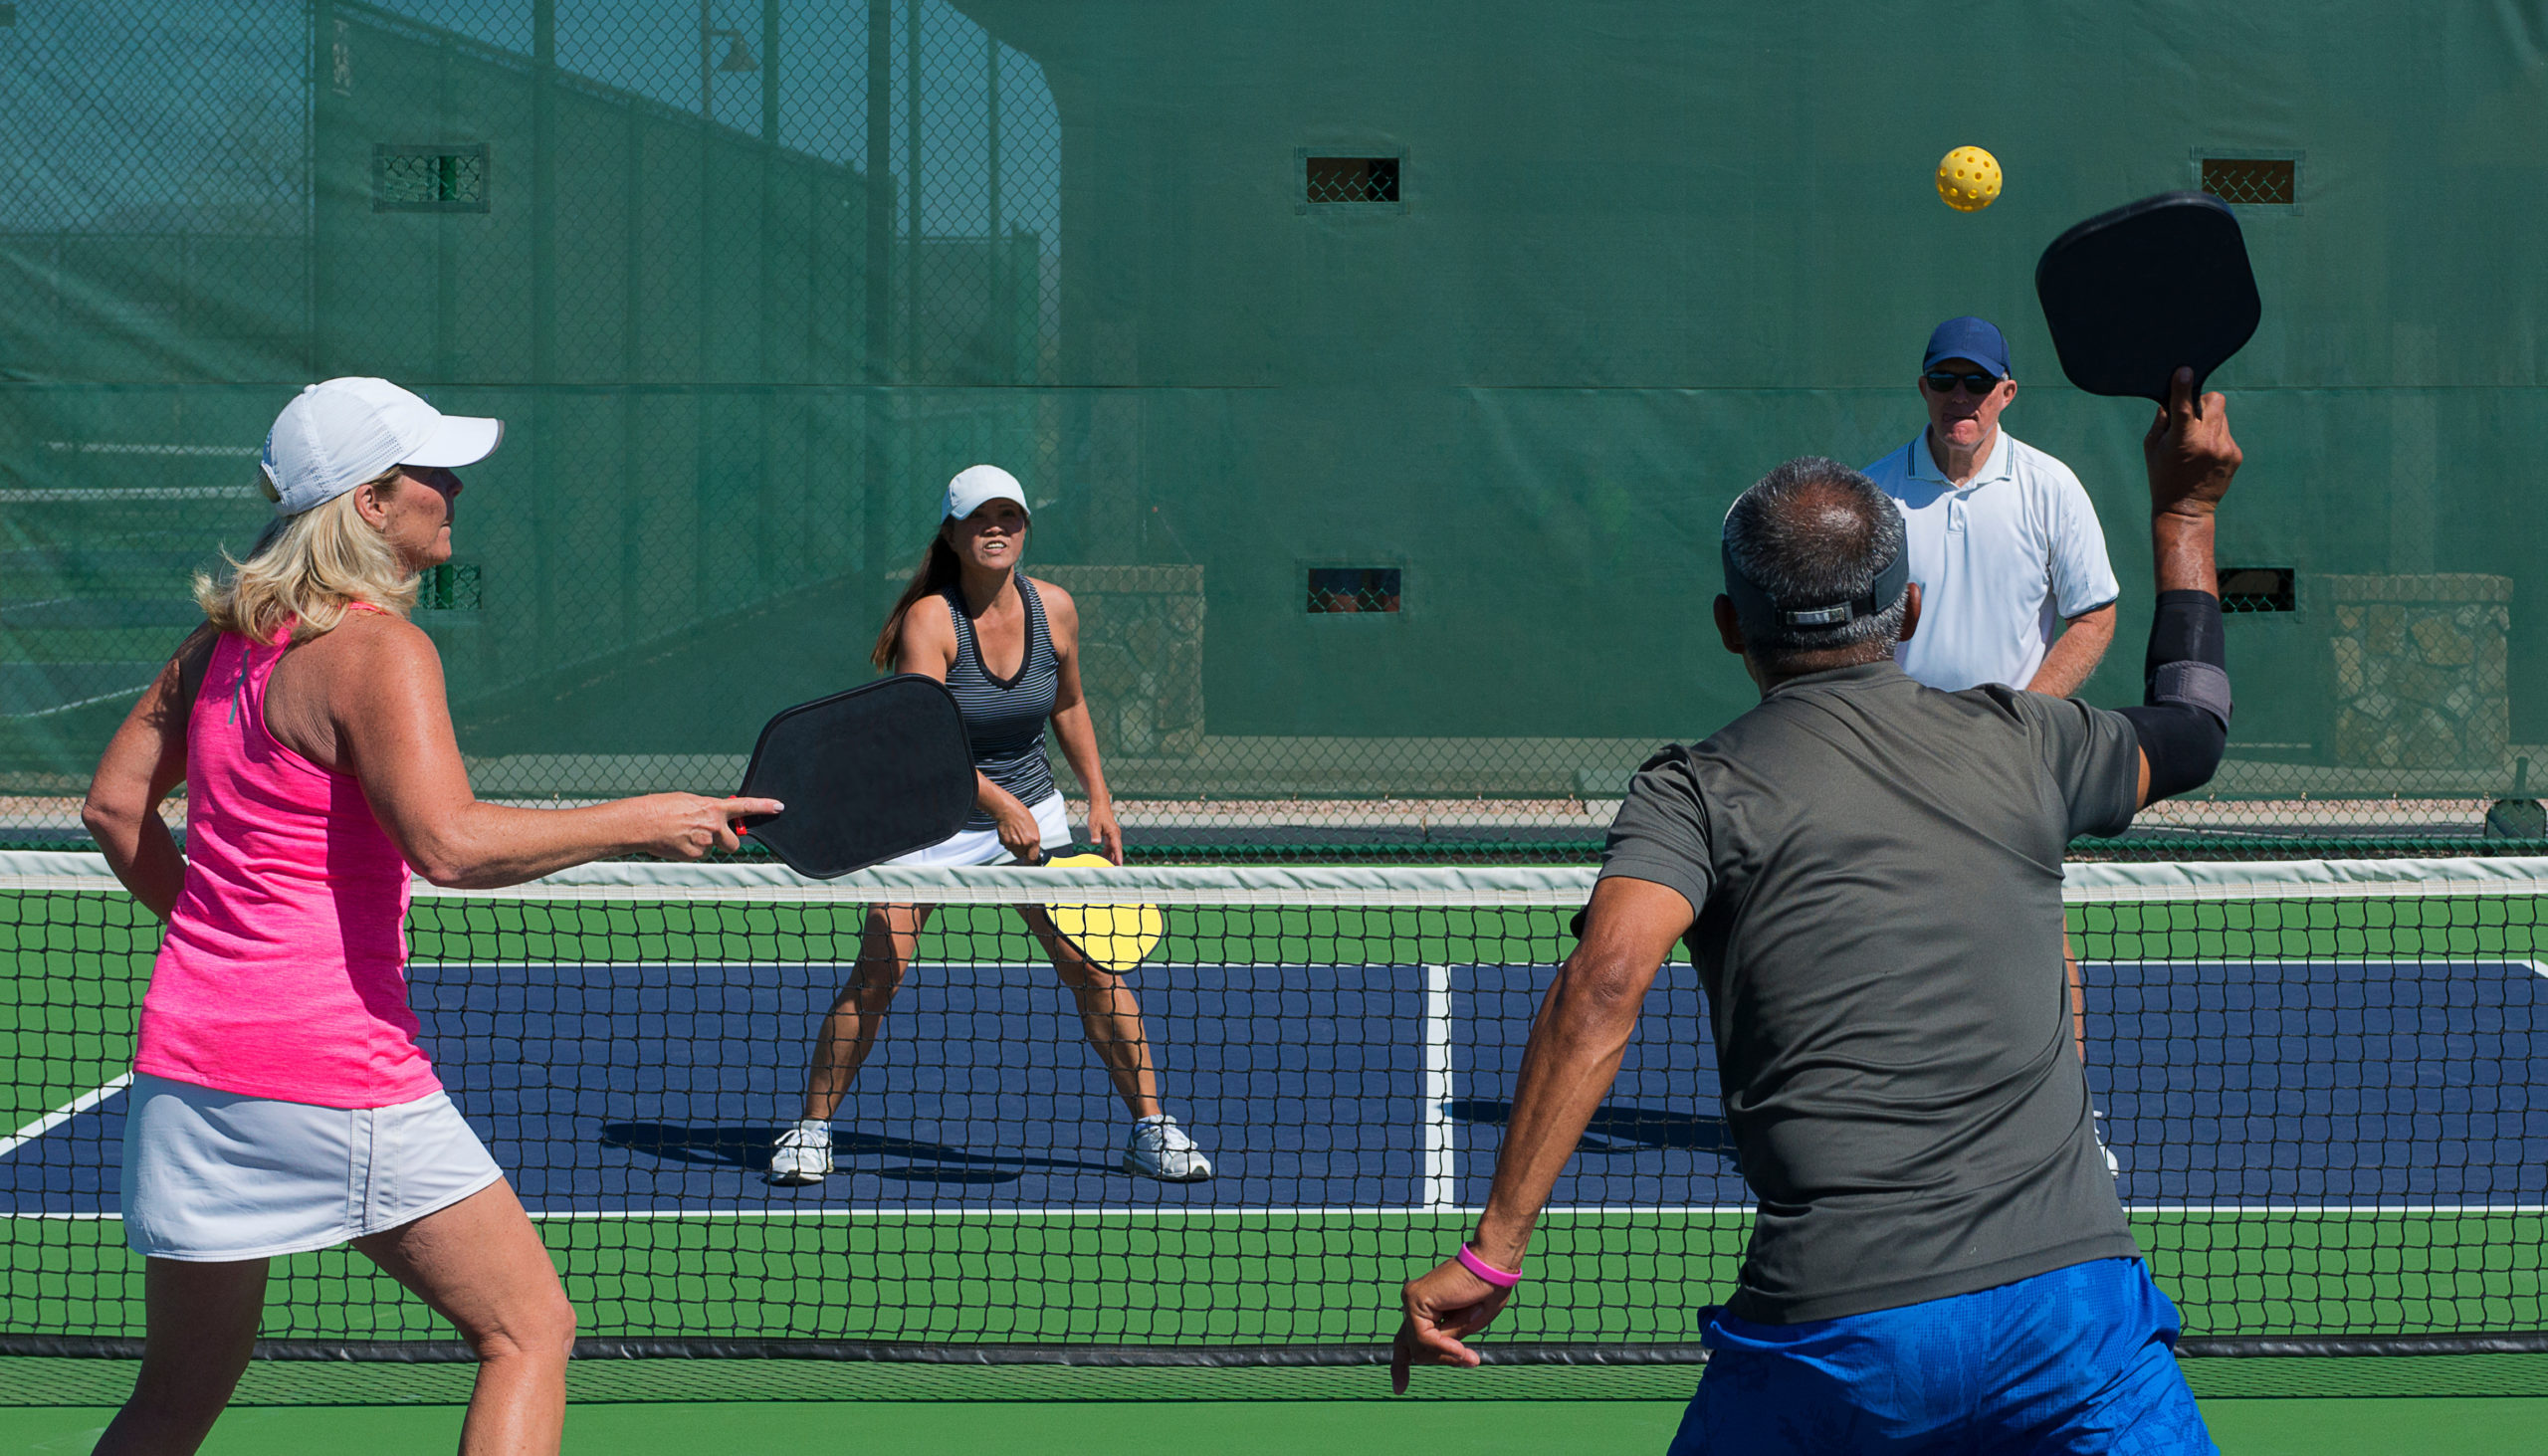 Pickleball is just one use for your newly resurfaced tennis court!